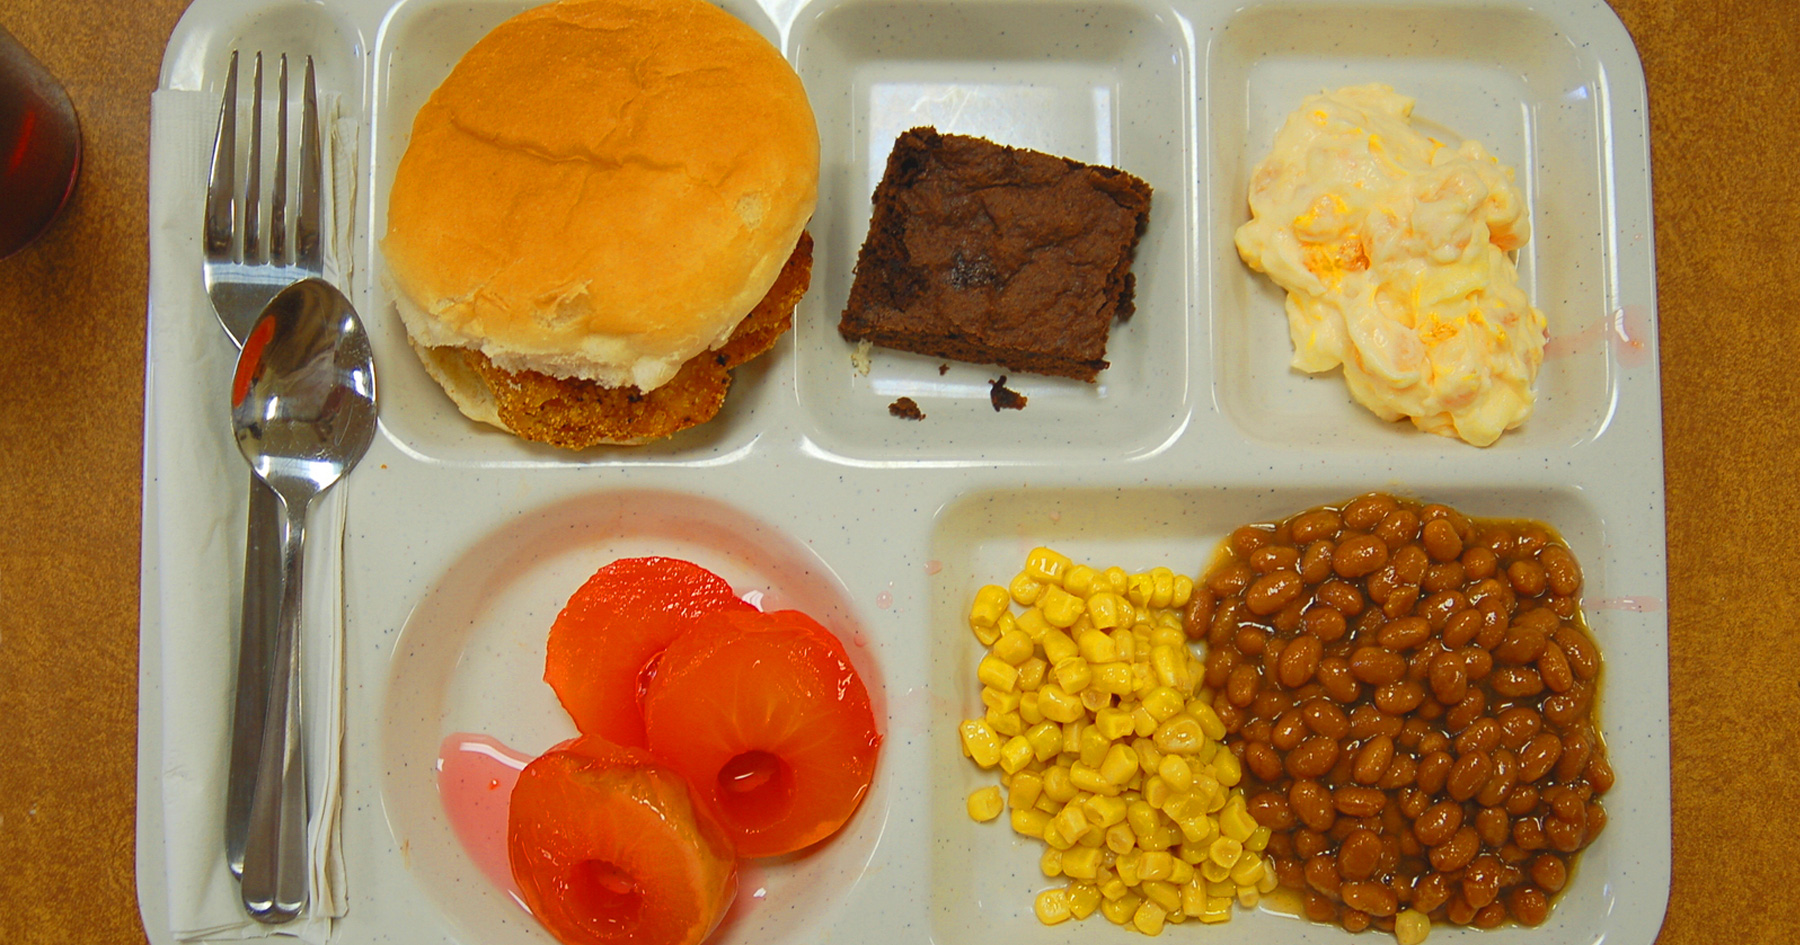 United States School Lunches